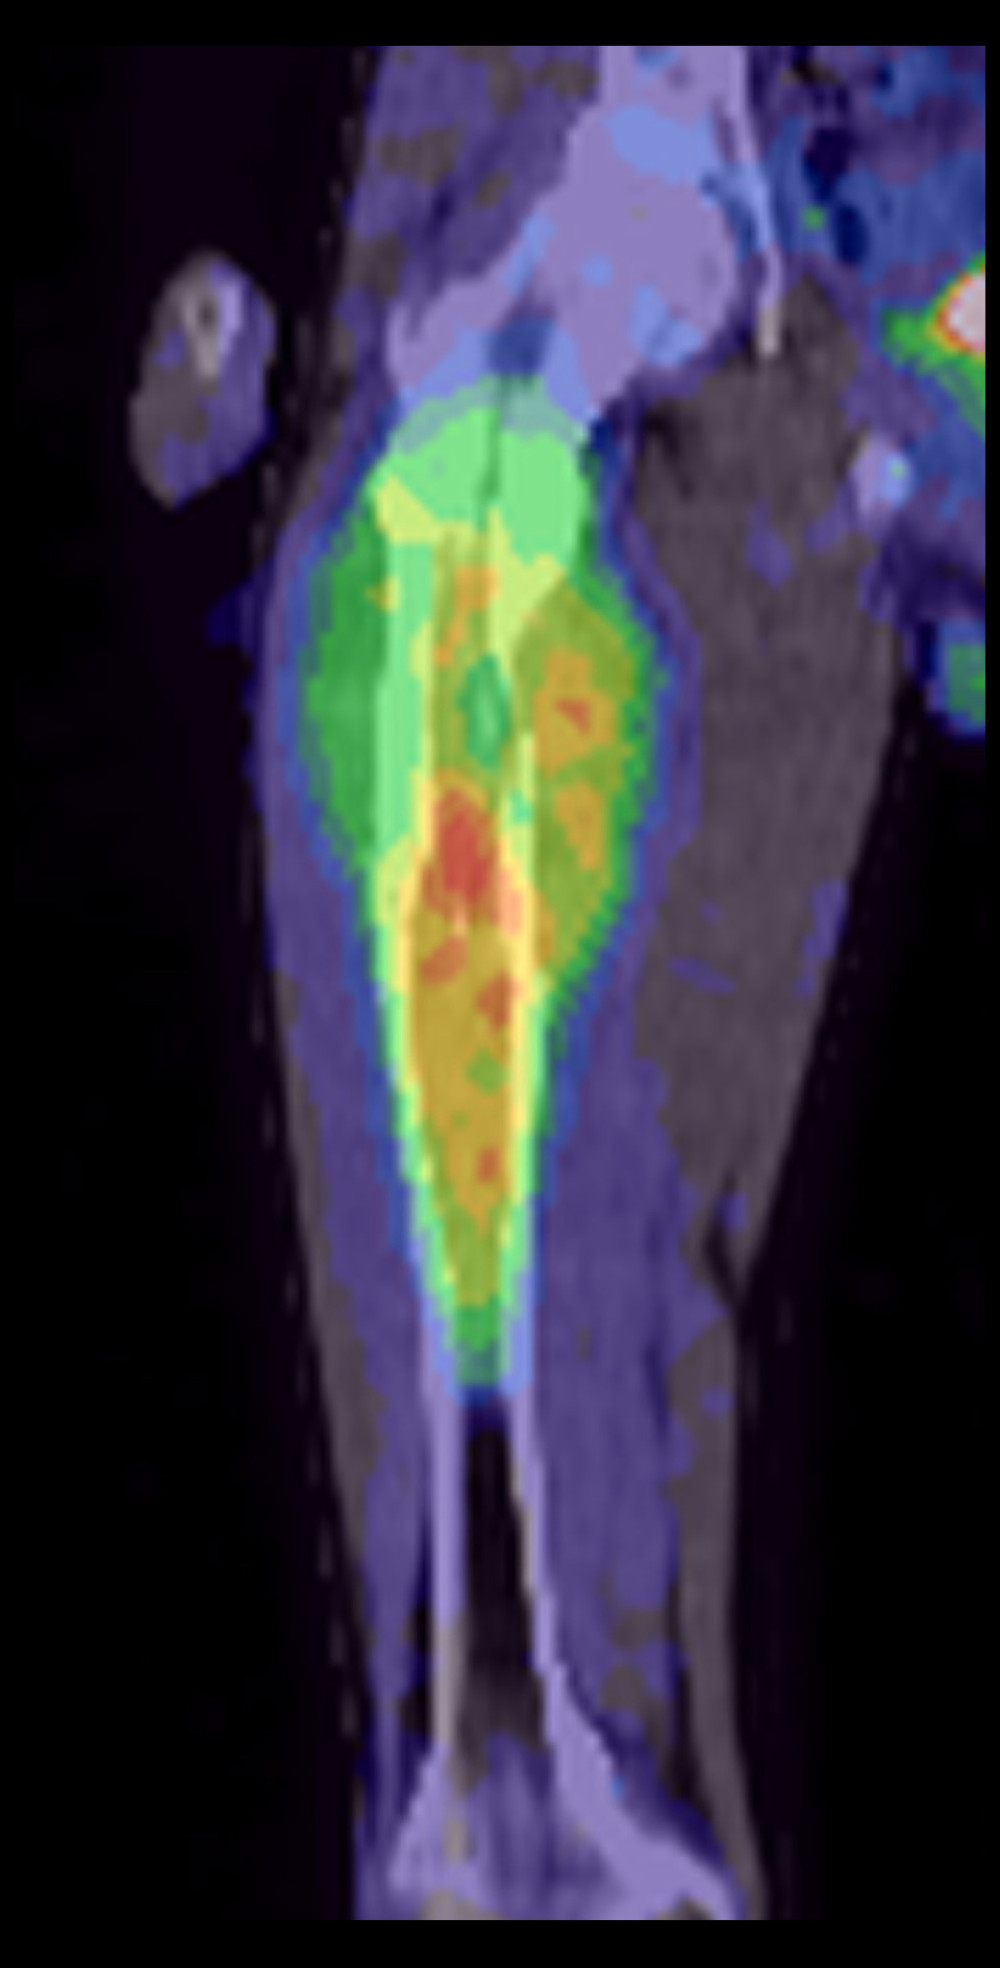 Positron emission tomography/computed tomography scanning showed high accumulation of 18F-fluorodeoxyglucose at the femoral lesion.